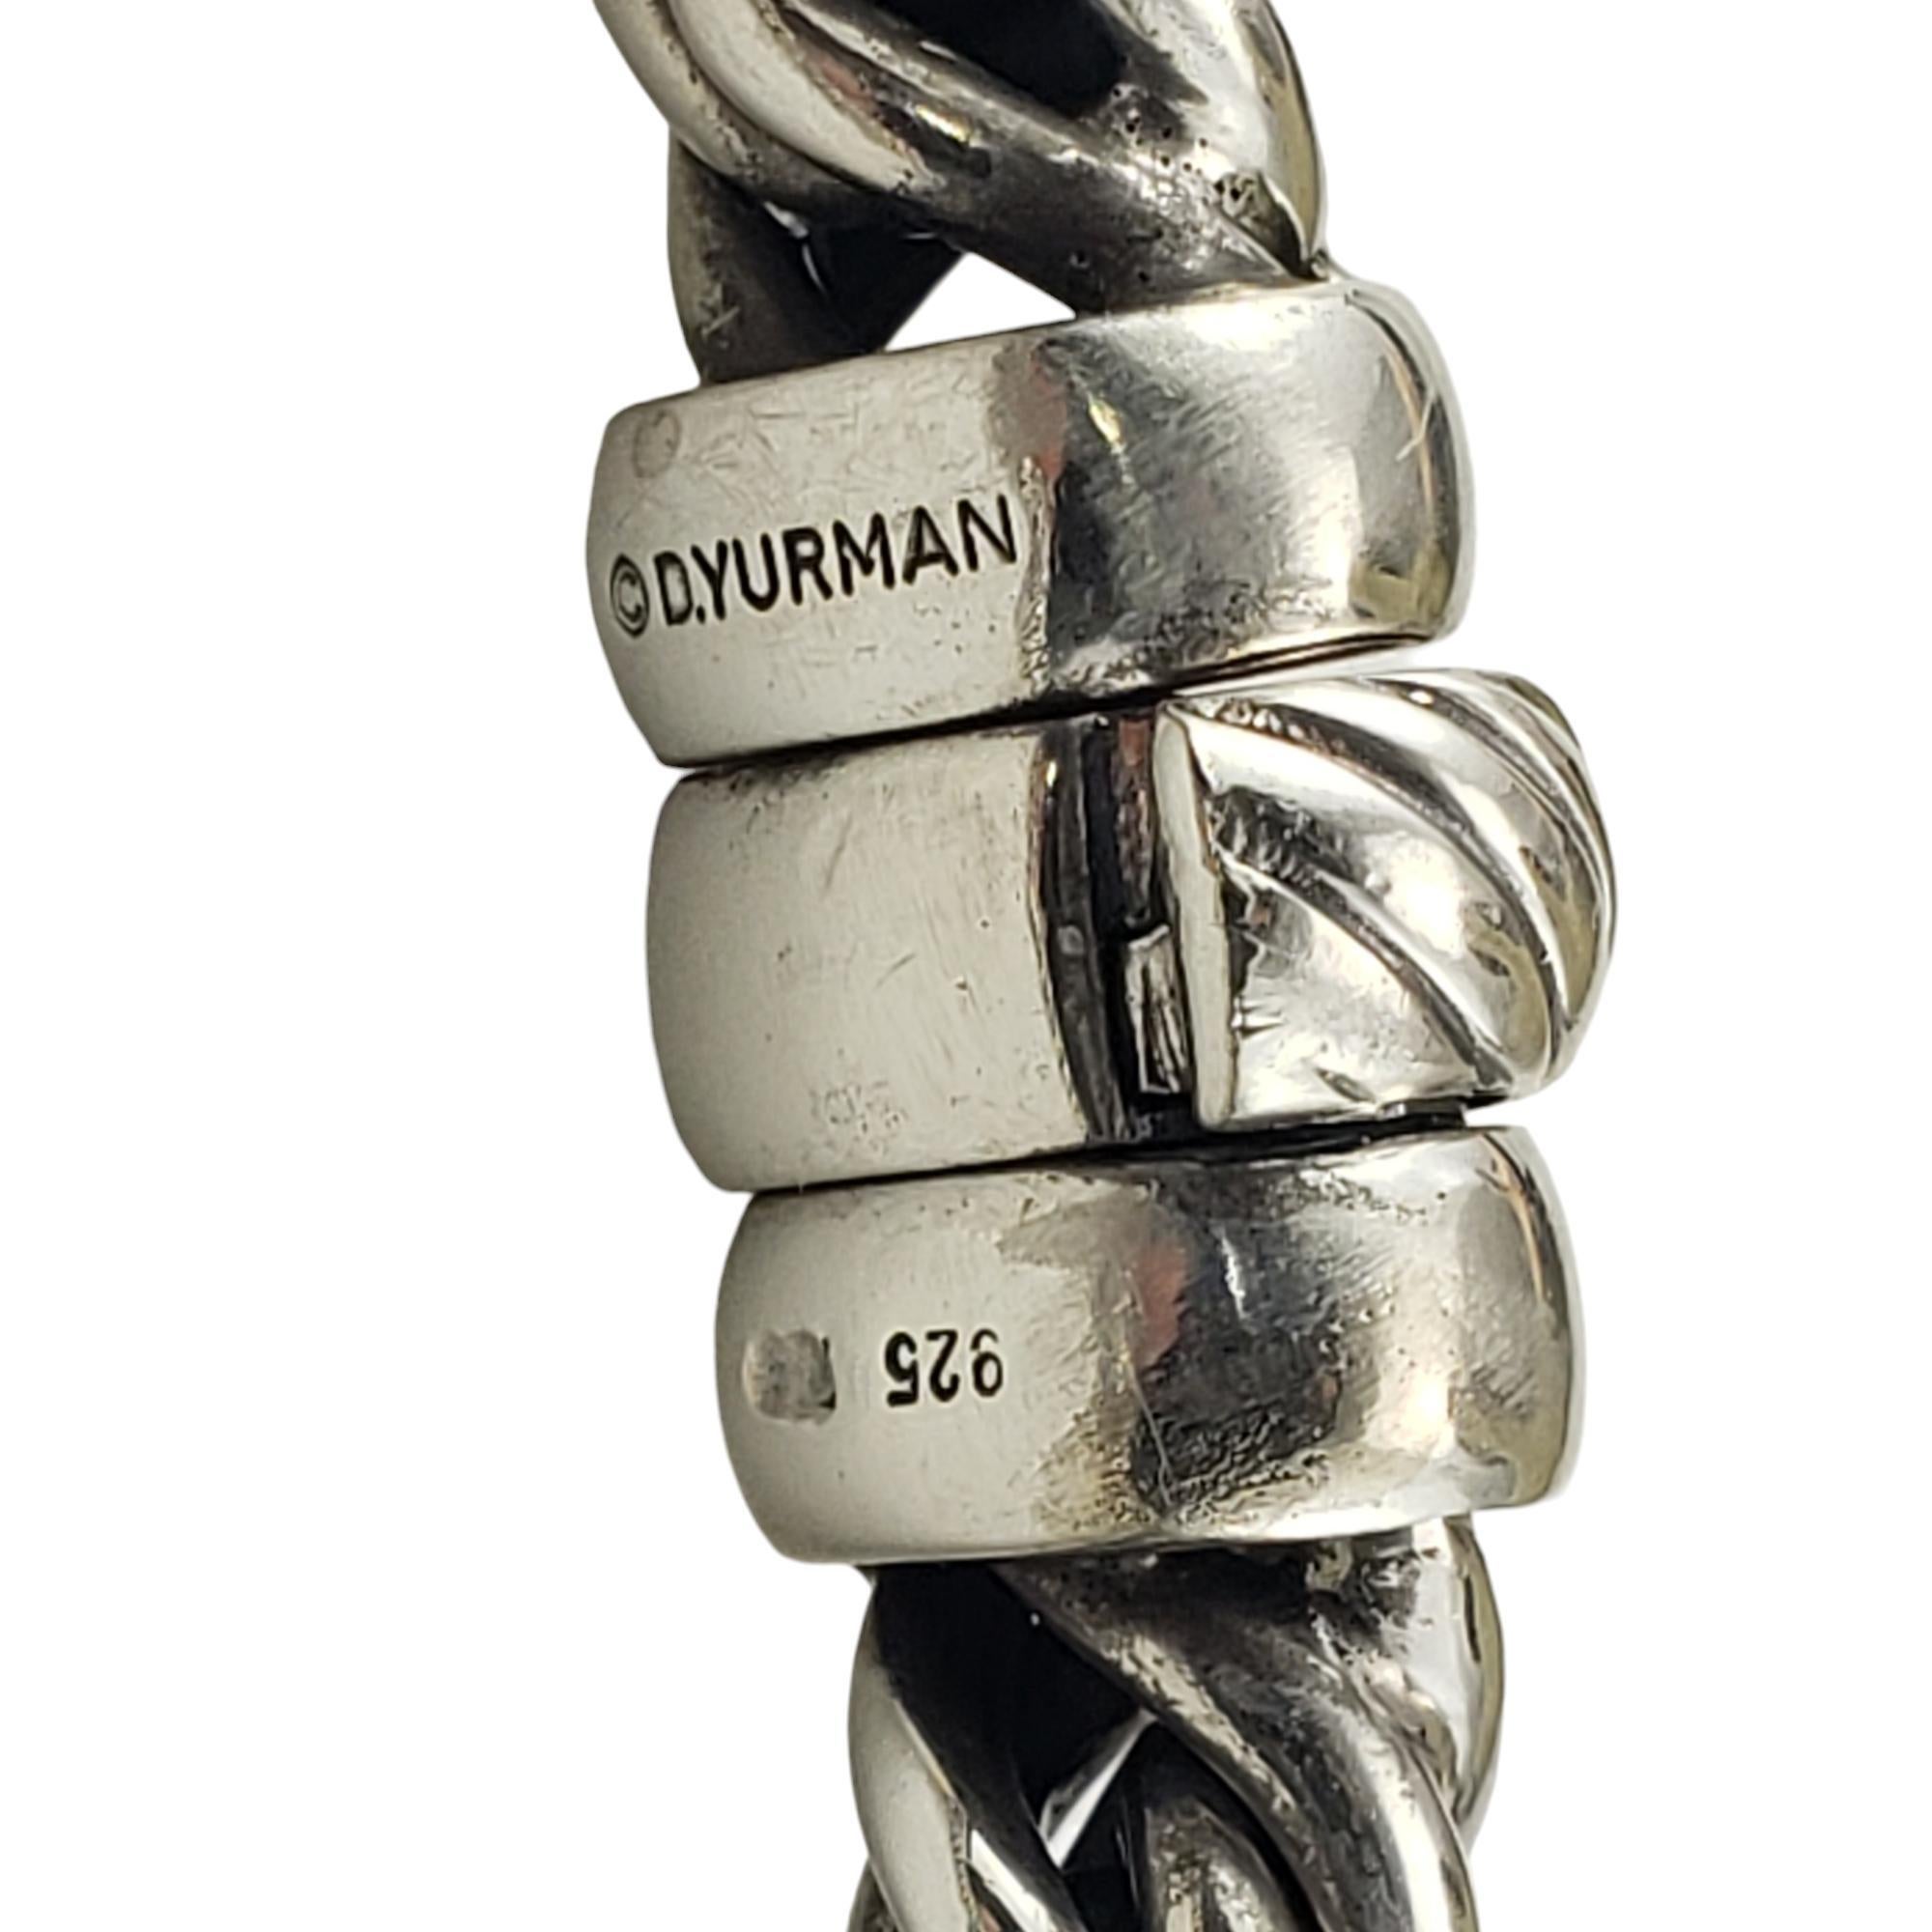 David Yurman Sterling Silver and Diamond Lyrica Bracelet #17078 In Good Condition For Sale In Washington Depot, CT